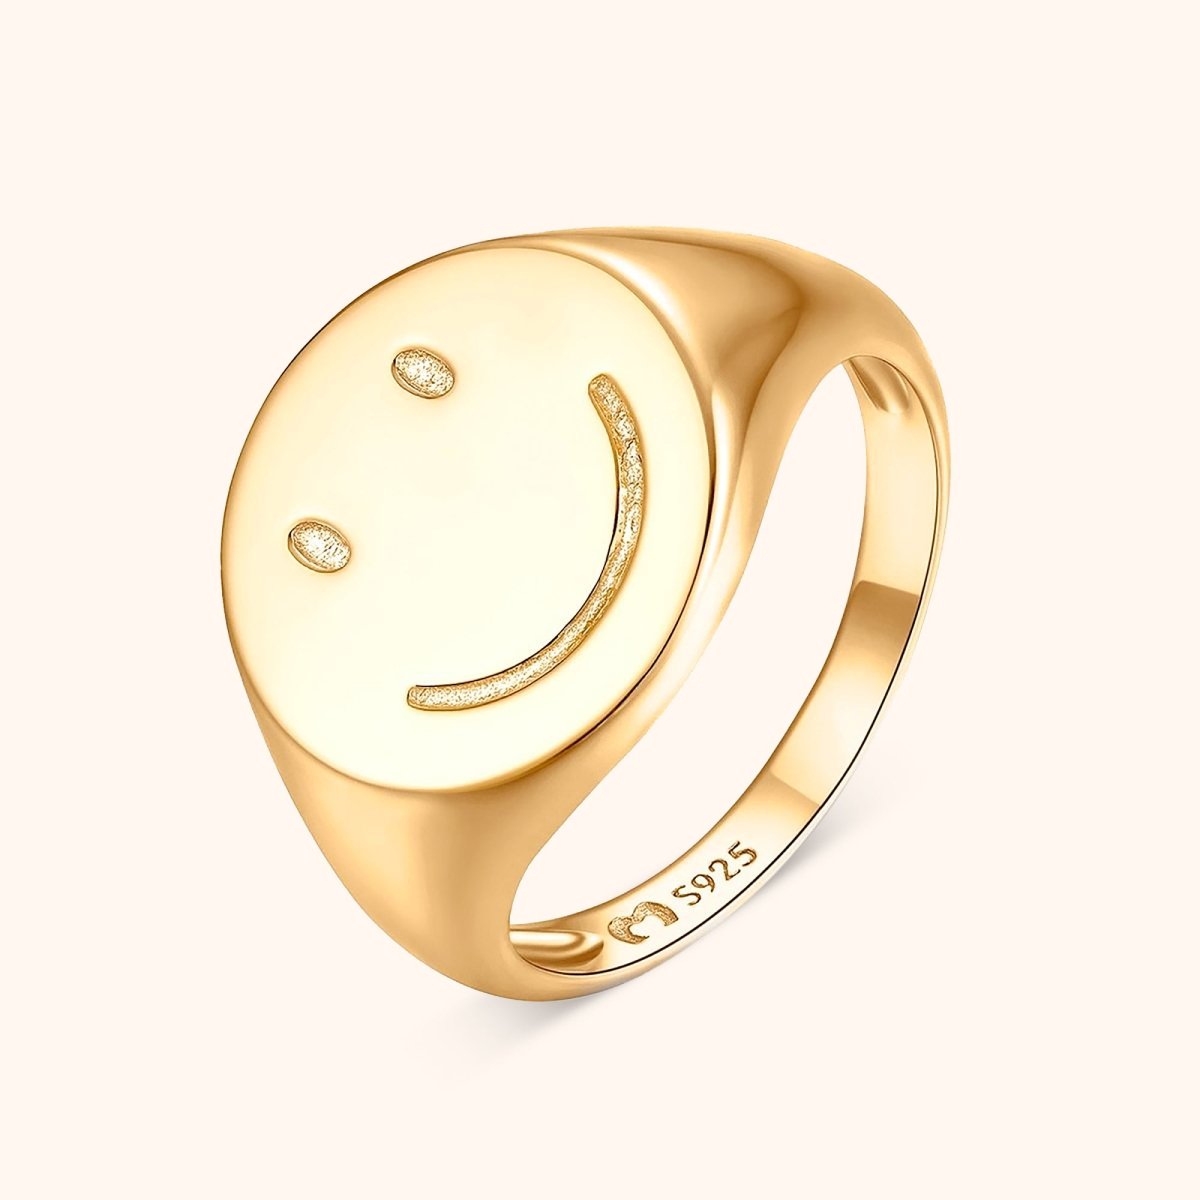 "Happiness" Ring - Milas Jewels Shop